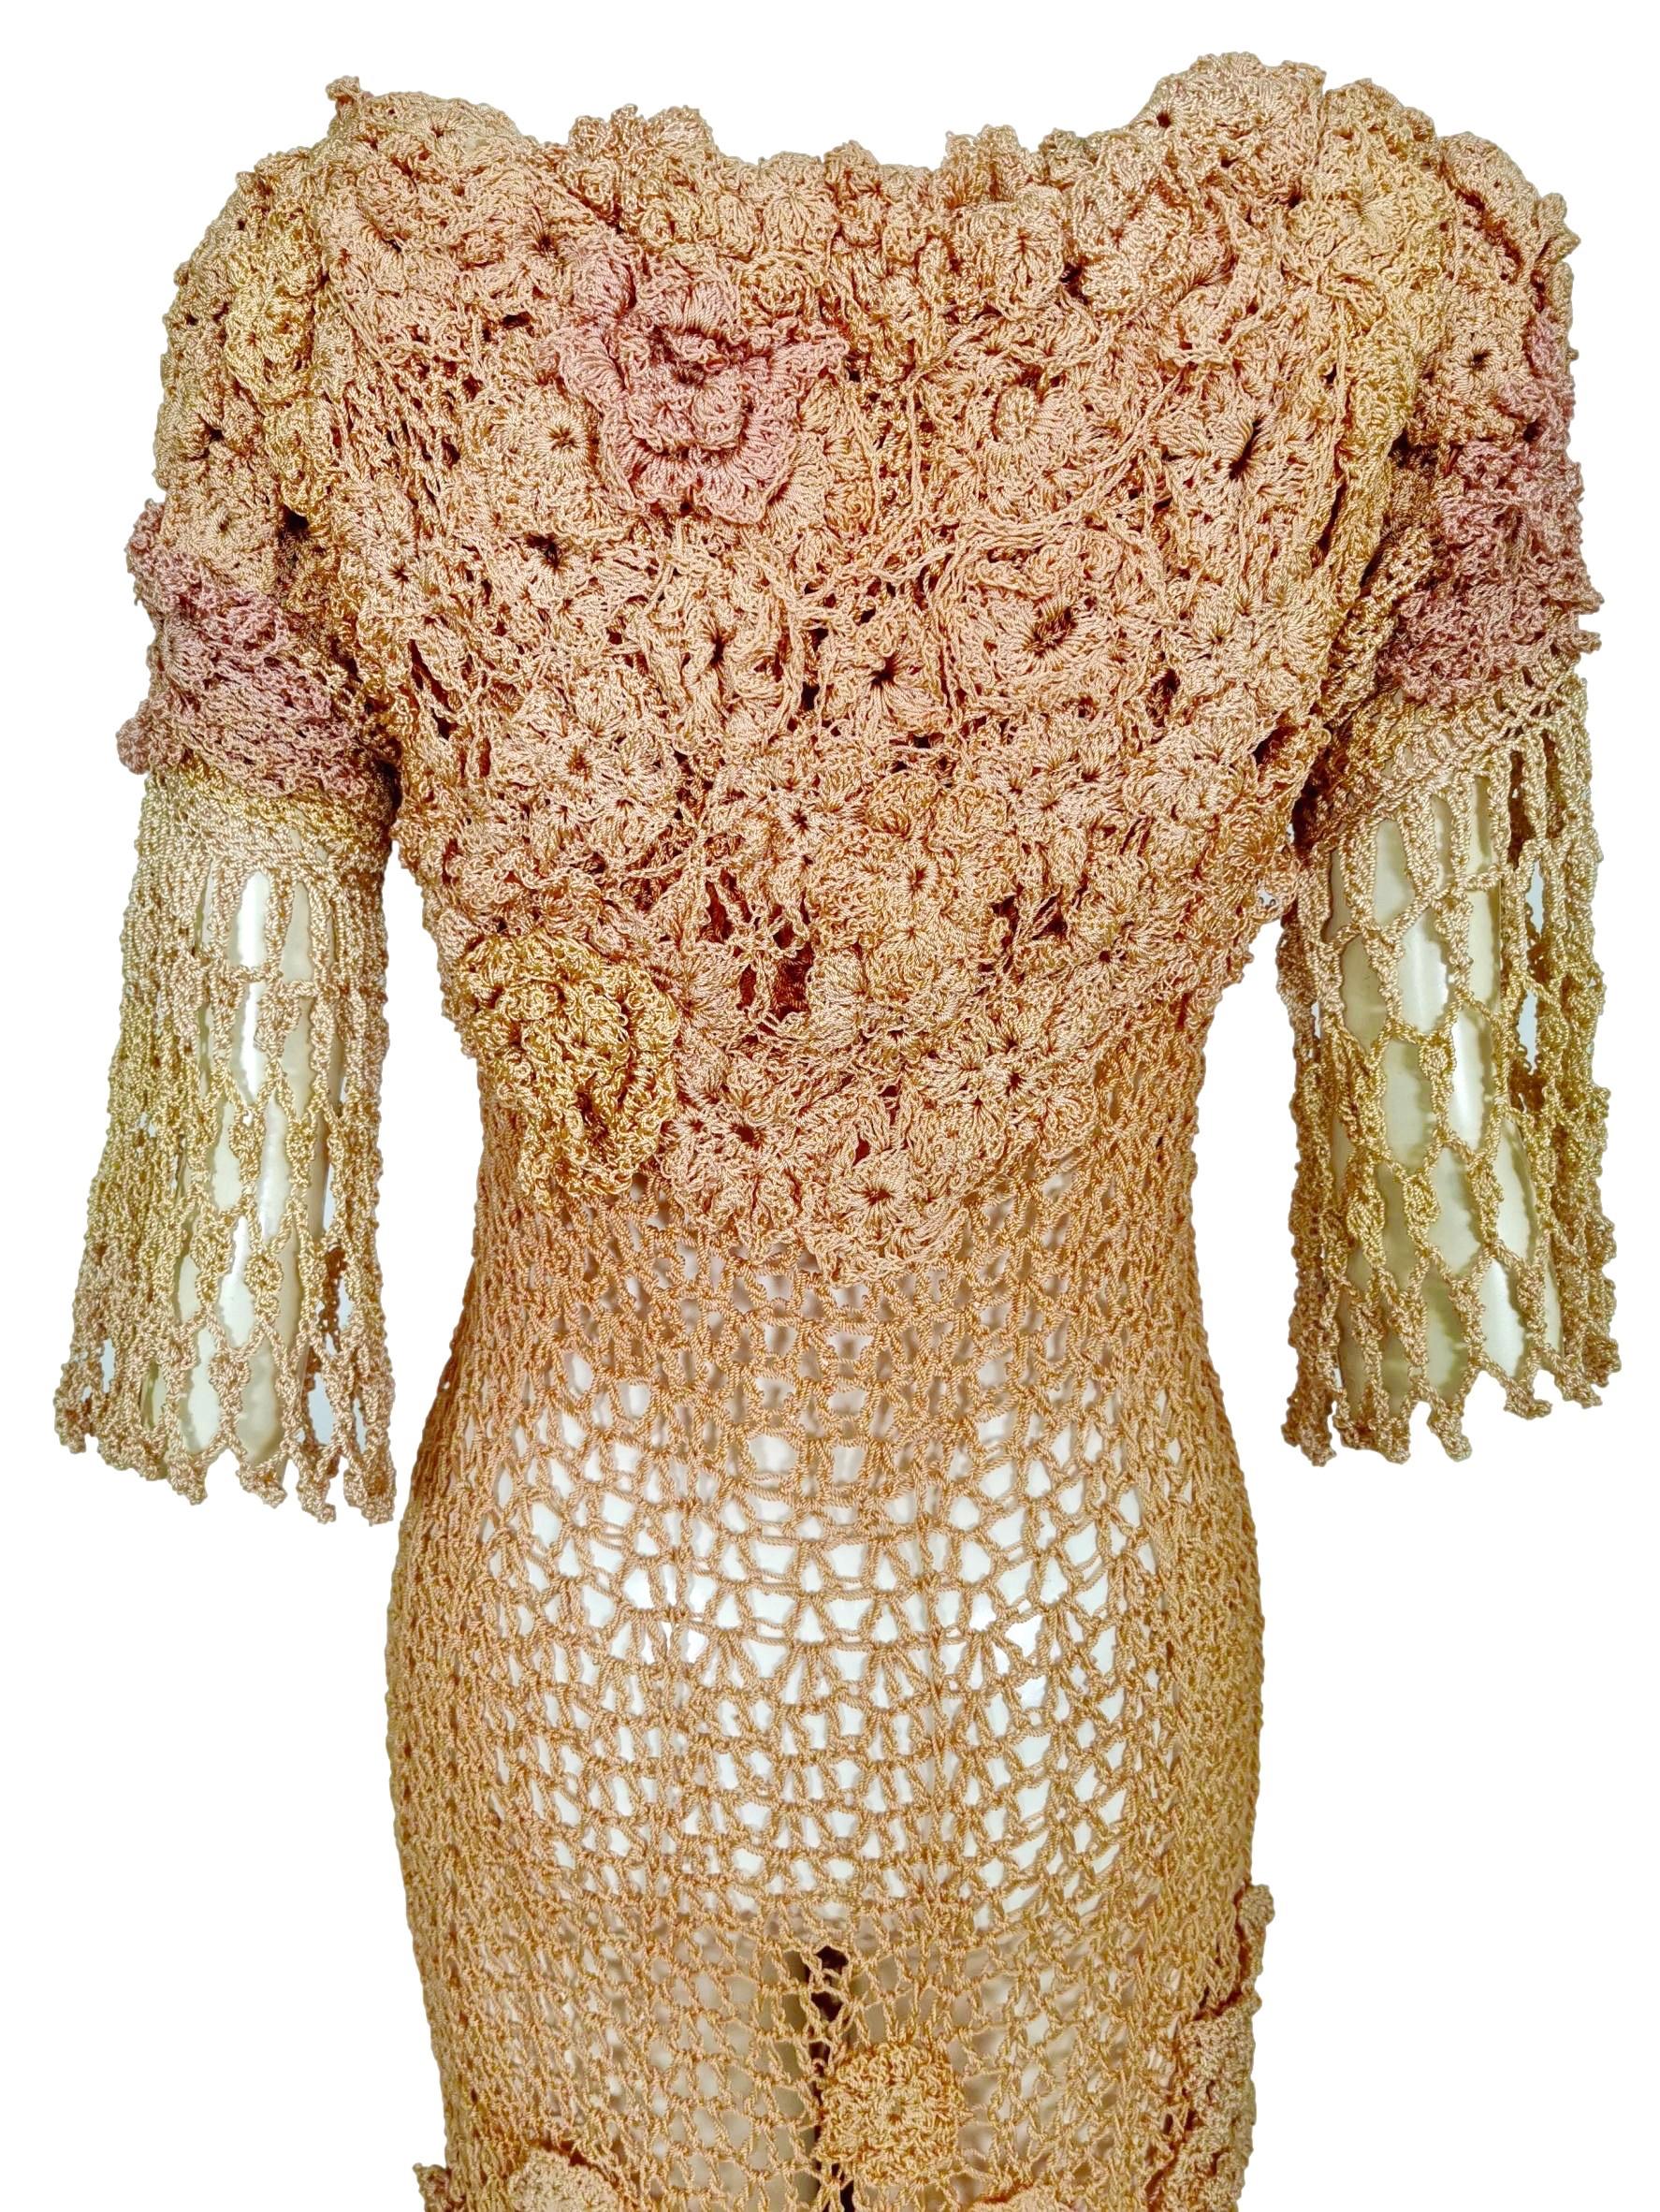 Russian Hand Crocheted Rayon Summer Dress   In Excellent Condition For Sale In Bath, GB